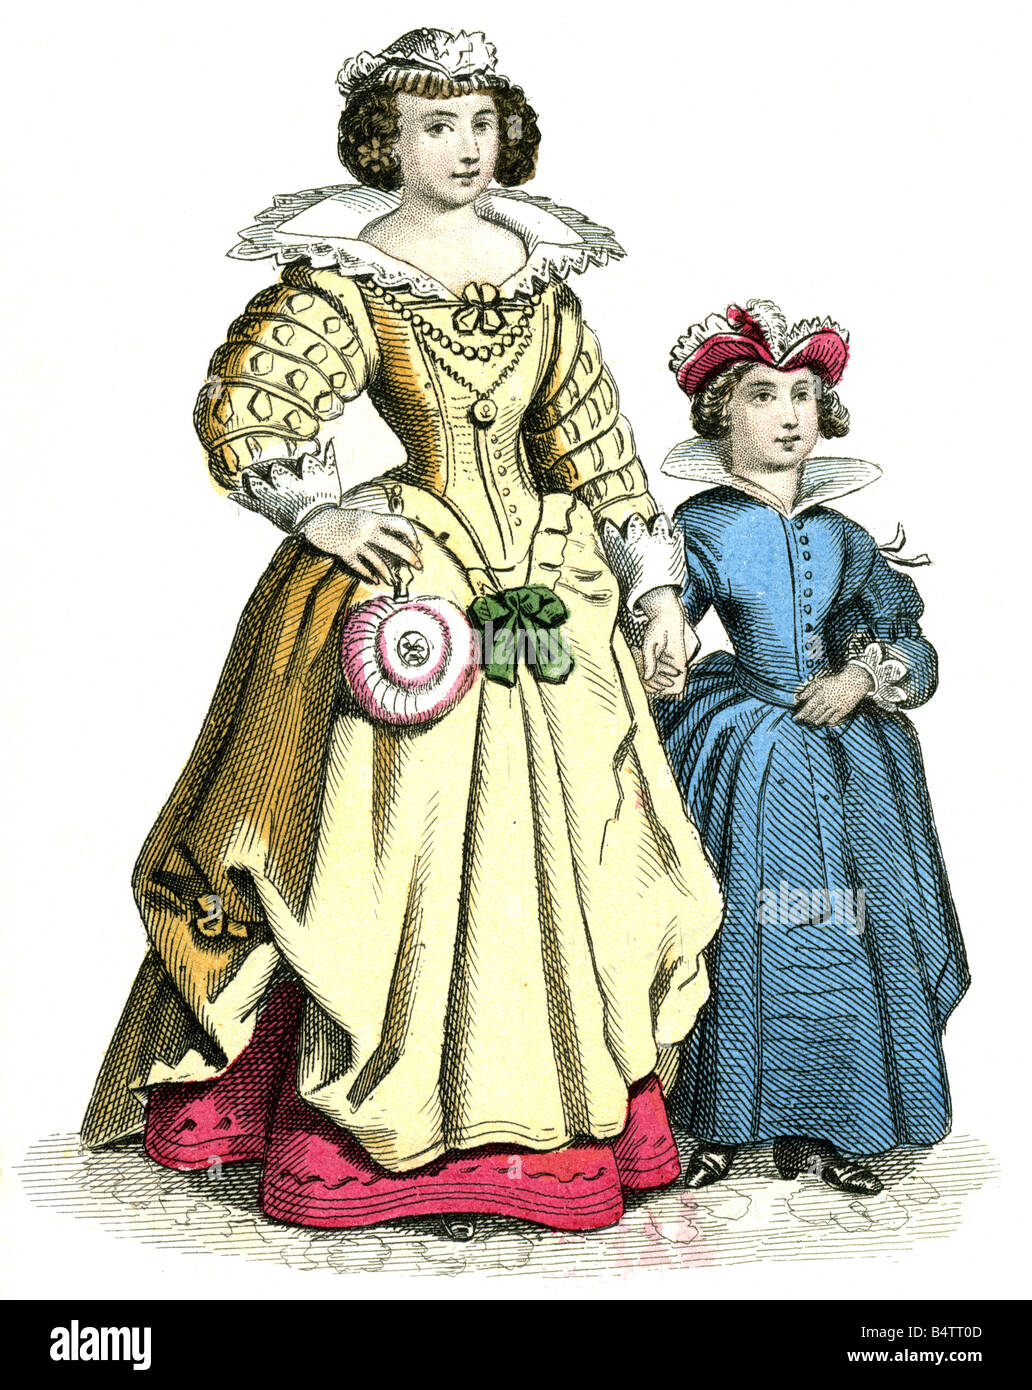 Mode, XVIIe siècle, France, costume pour femme, vers 1630 Photo Stock -  Alamy